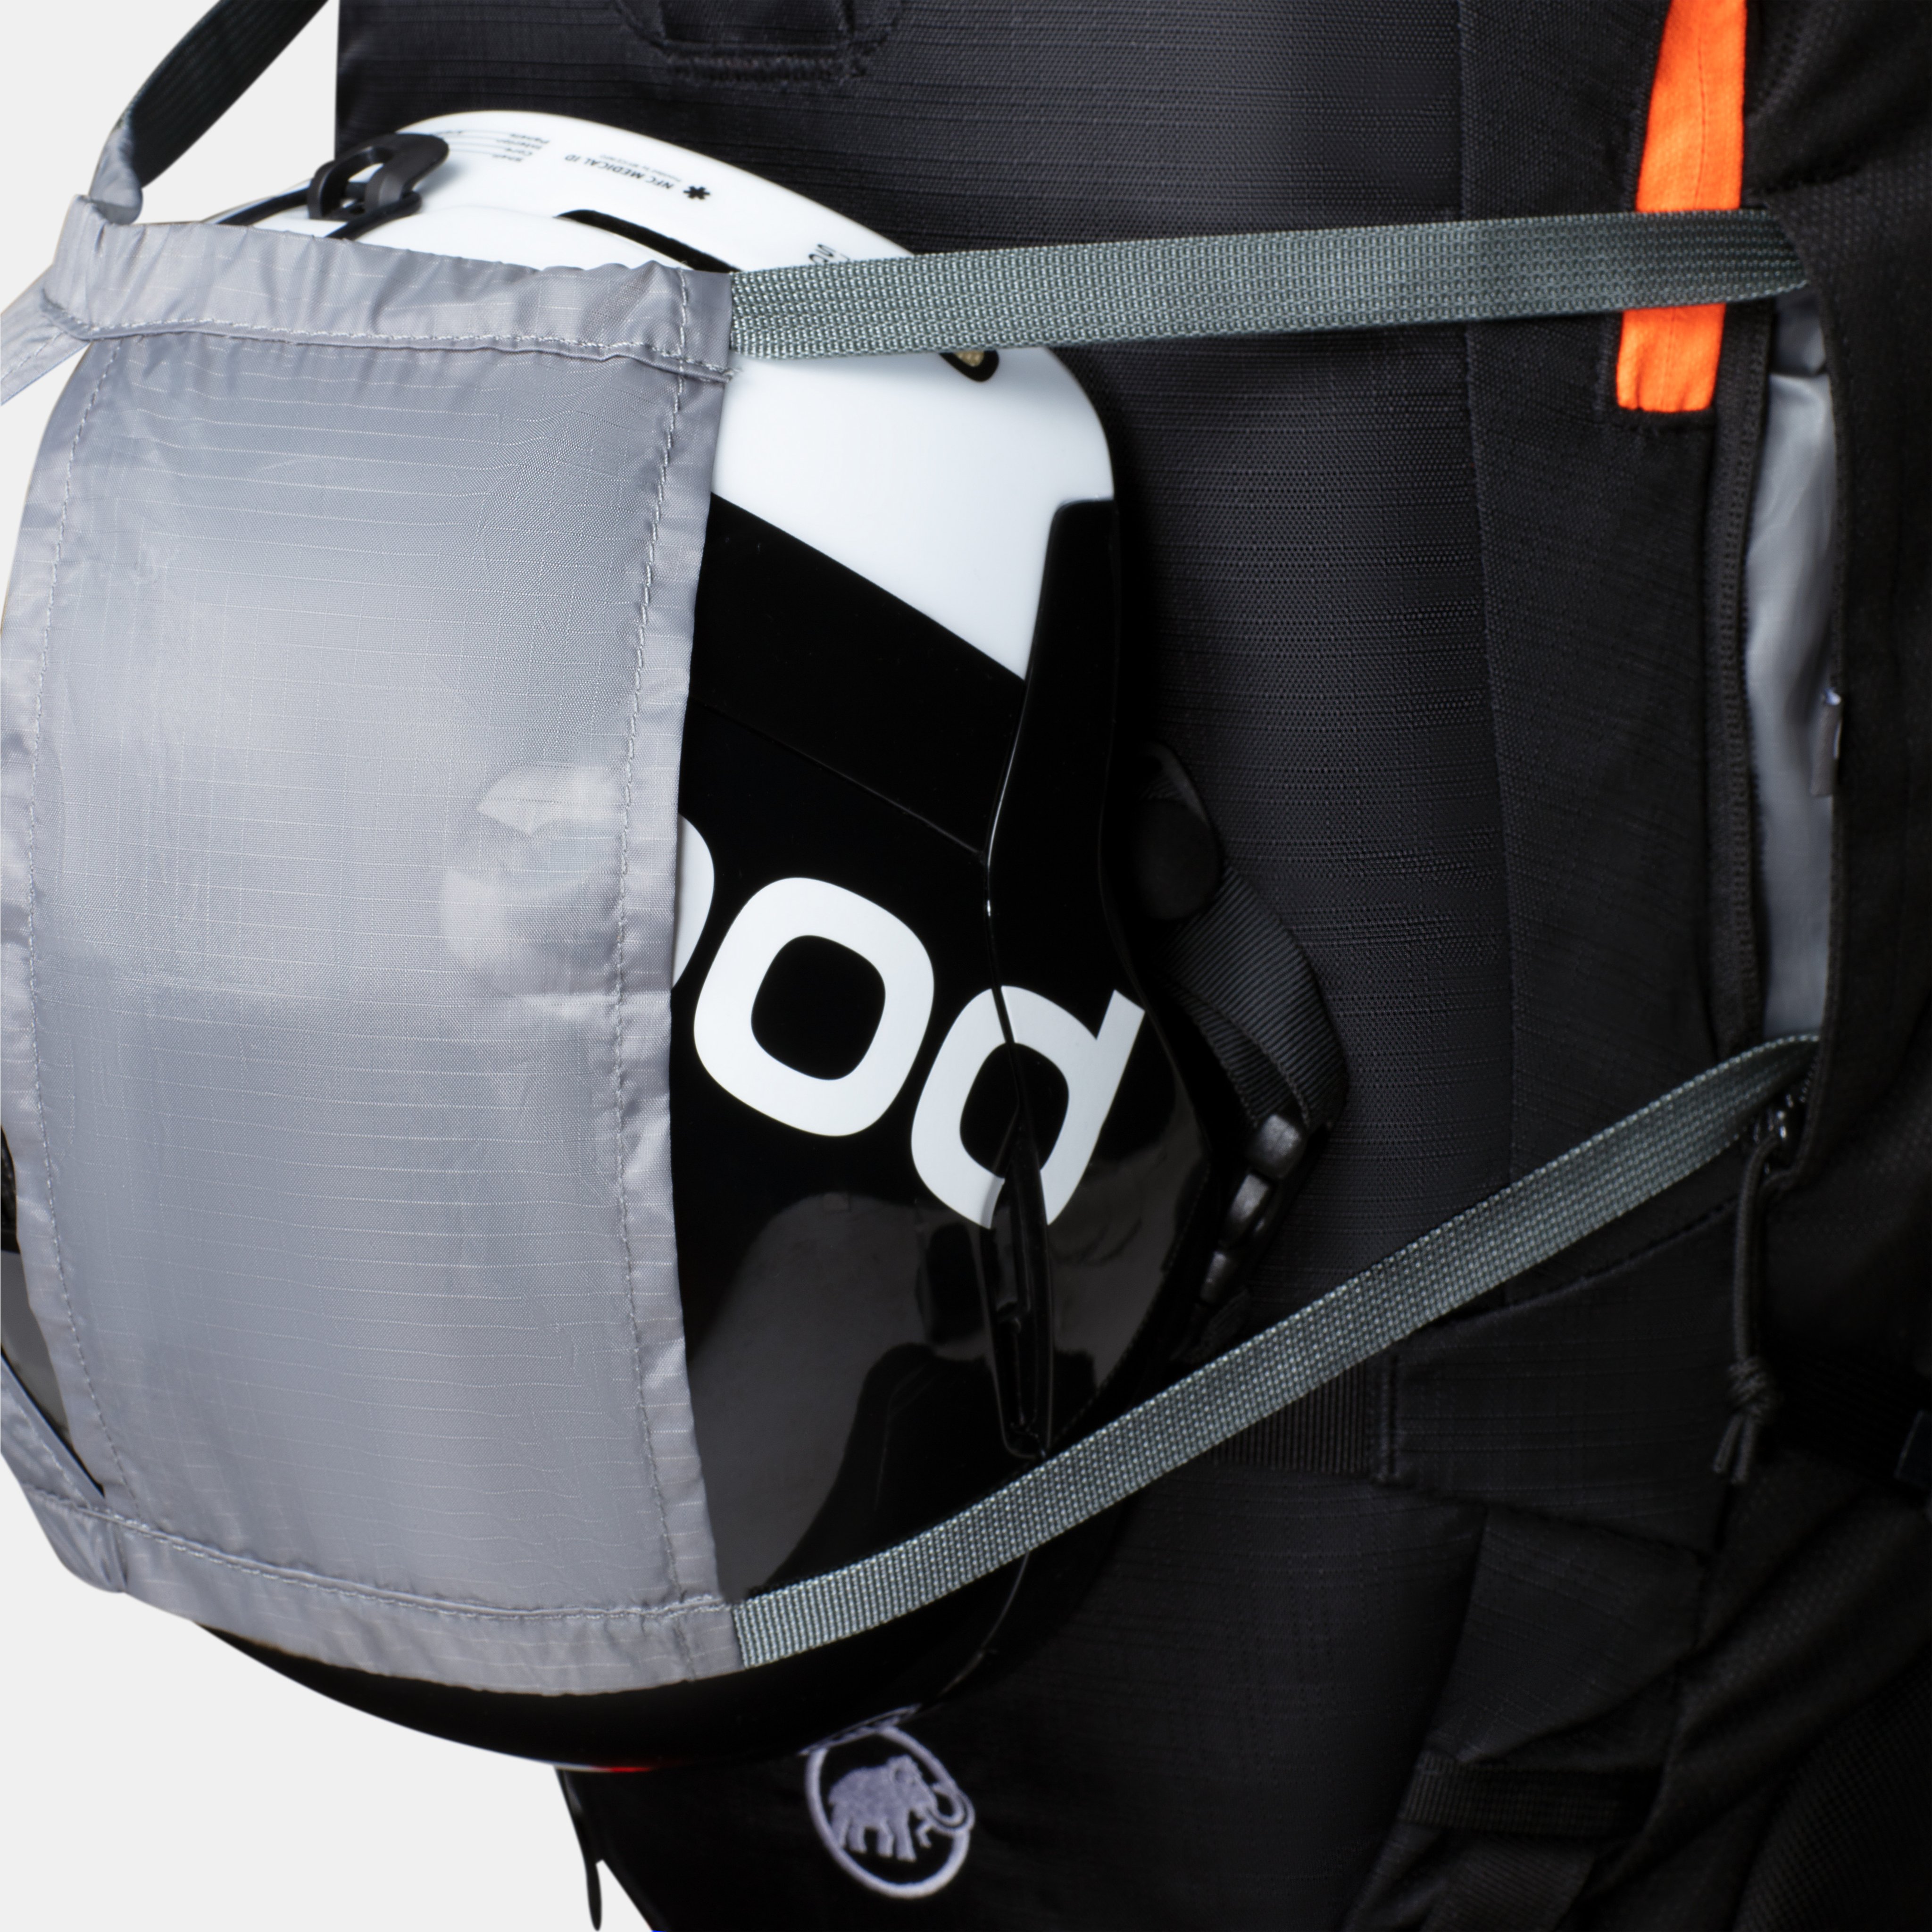 Pro Removable Airbag 3.0 image